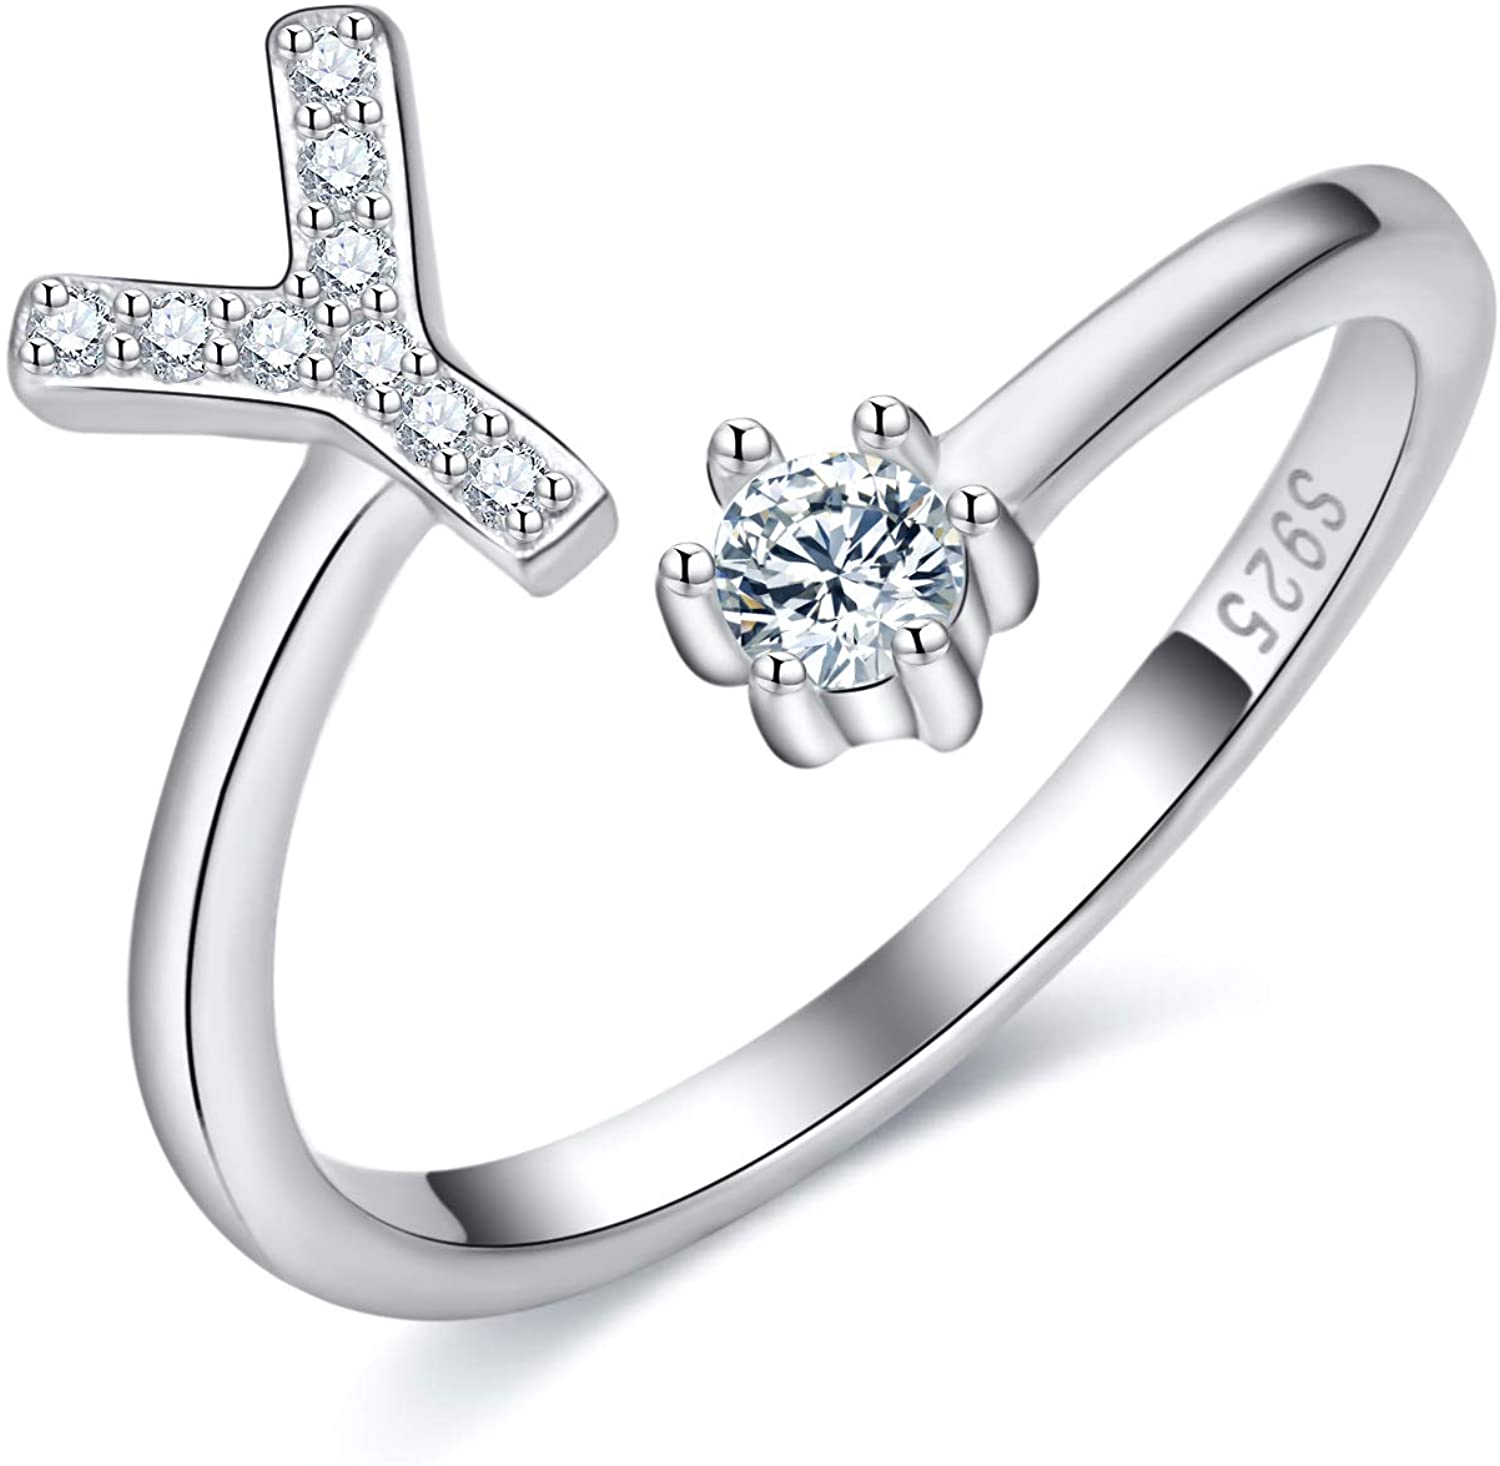 Cross-Border 26 English Letters S925 Sterling Silver Ring